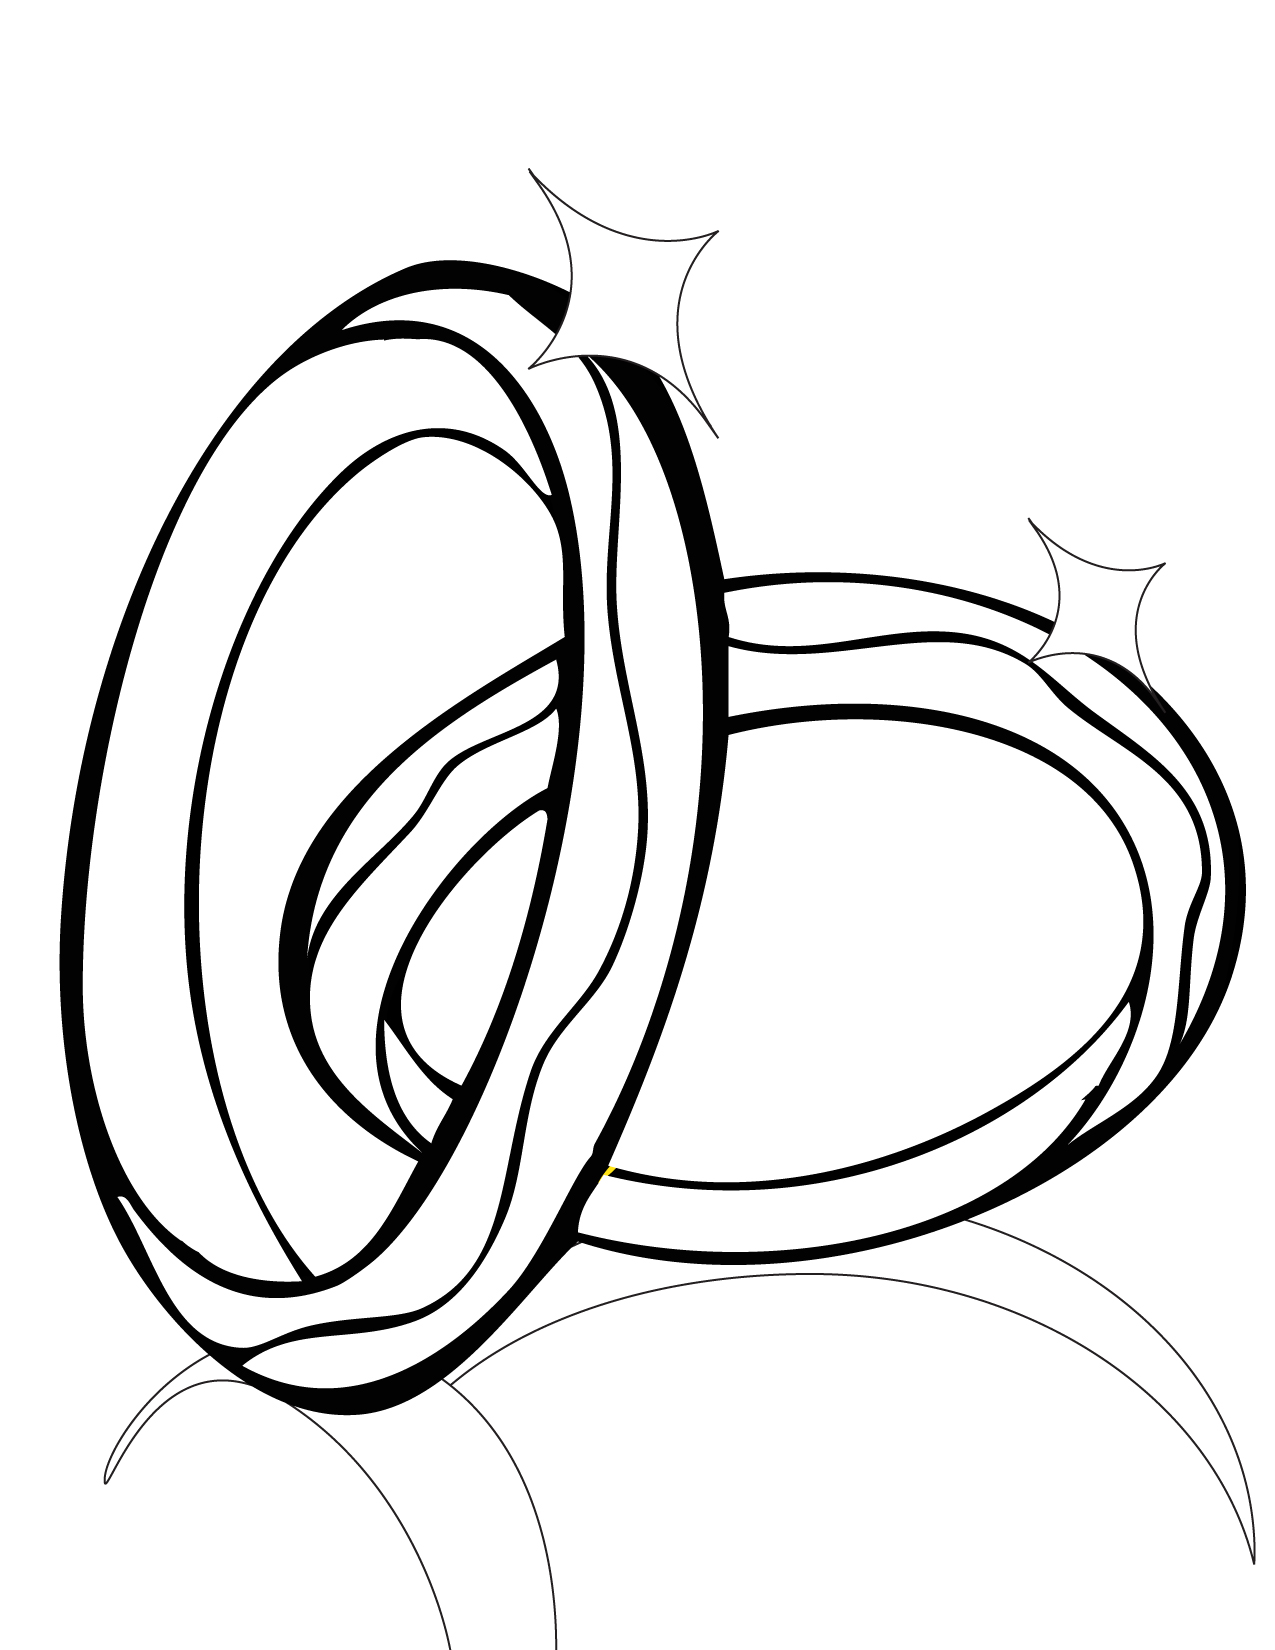 Wedding Ring Printable Coloring Pages